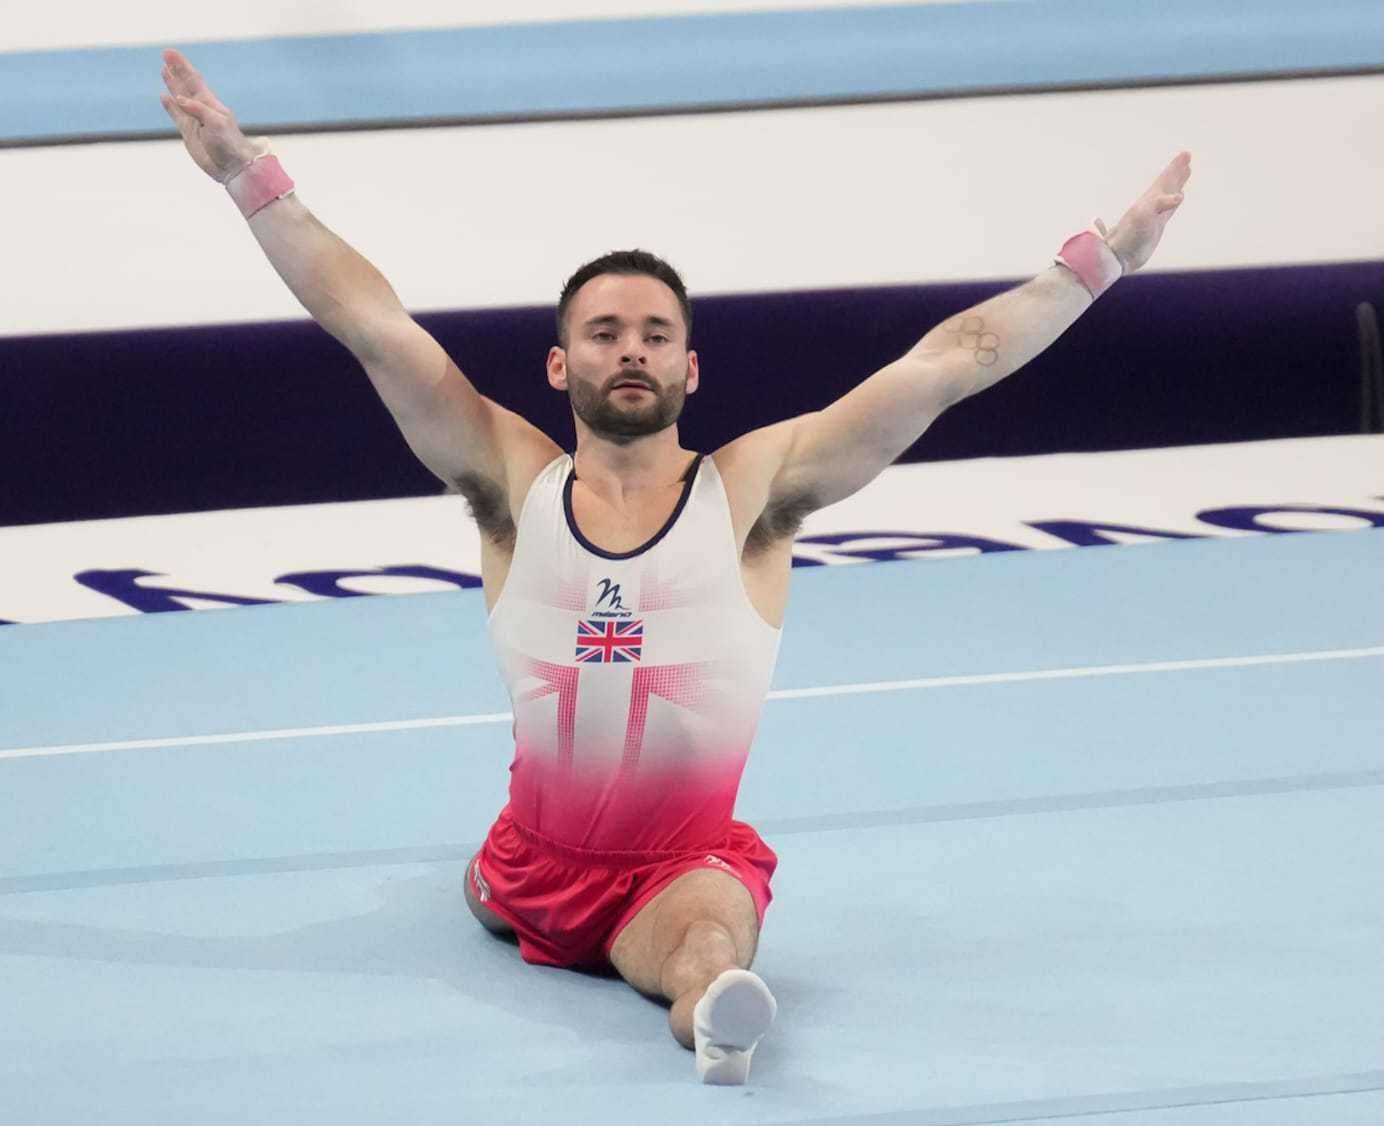 Maidstone's James Hall in action at the World Artistic Gymnastics Championships. Picture: British Gymnastics